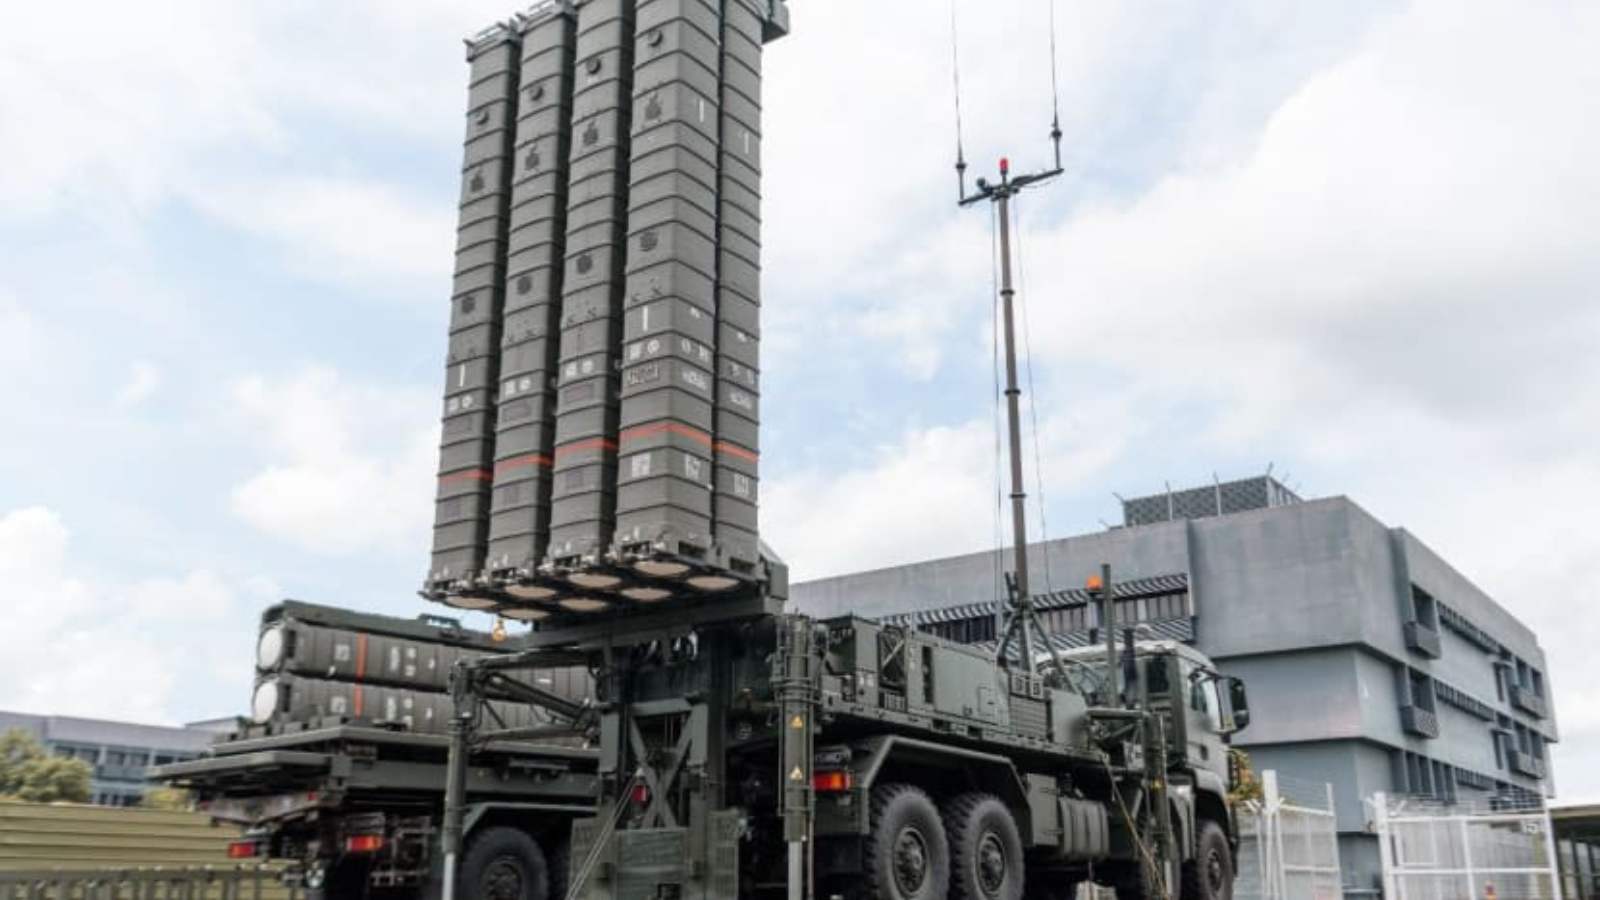 Aster 30 surface-to-air missile: Singapore's next defence system fully operational now